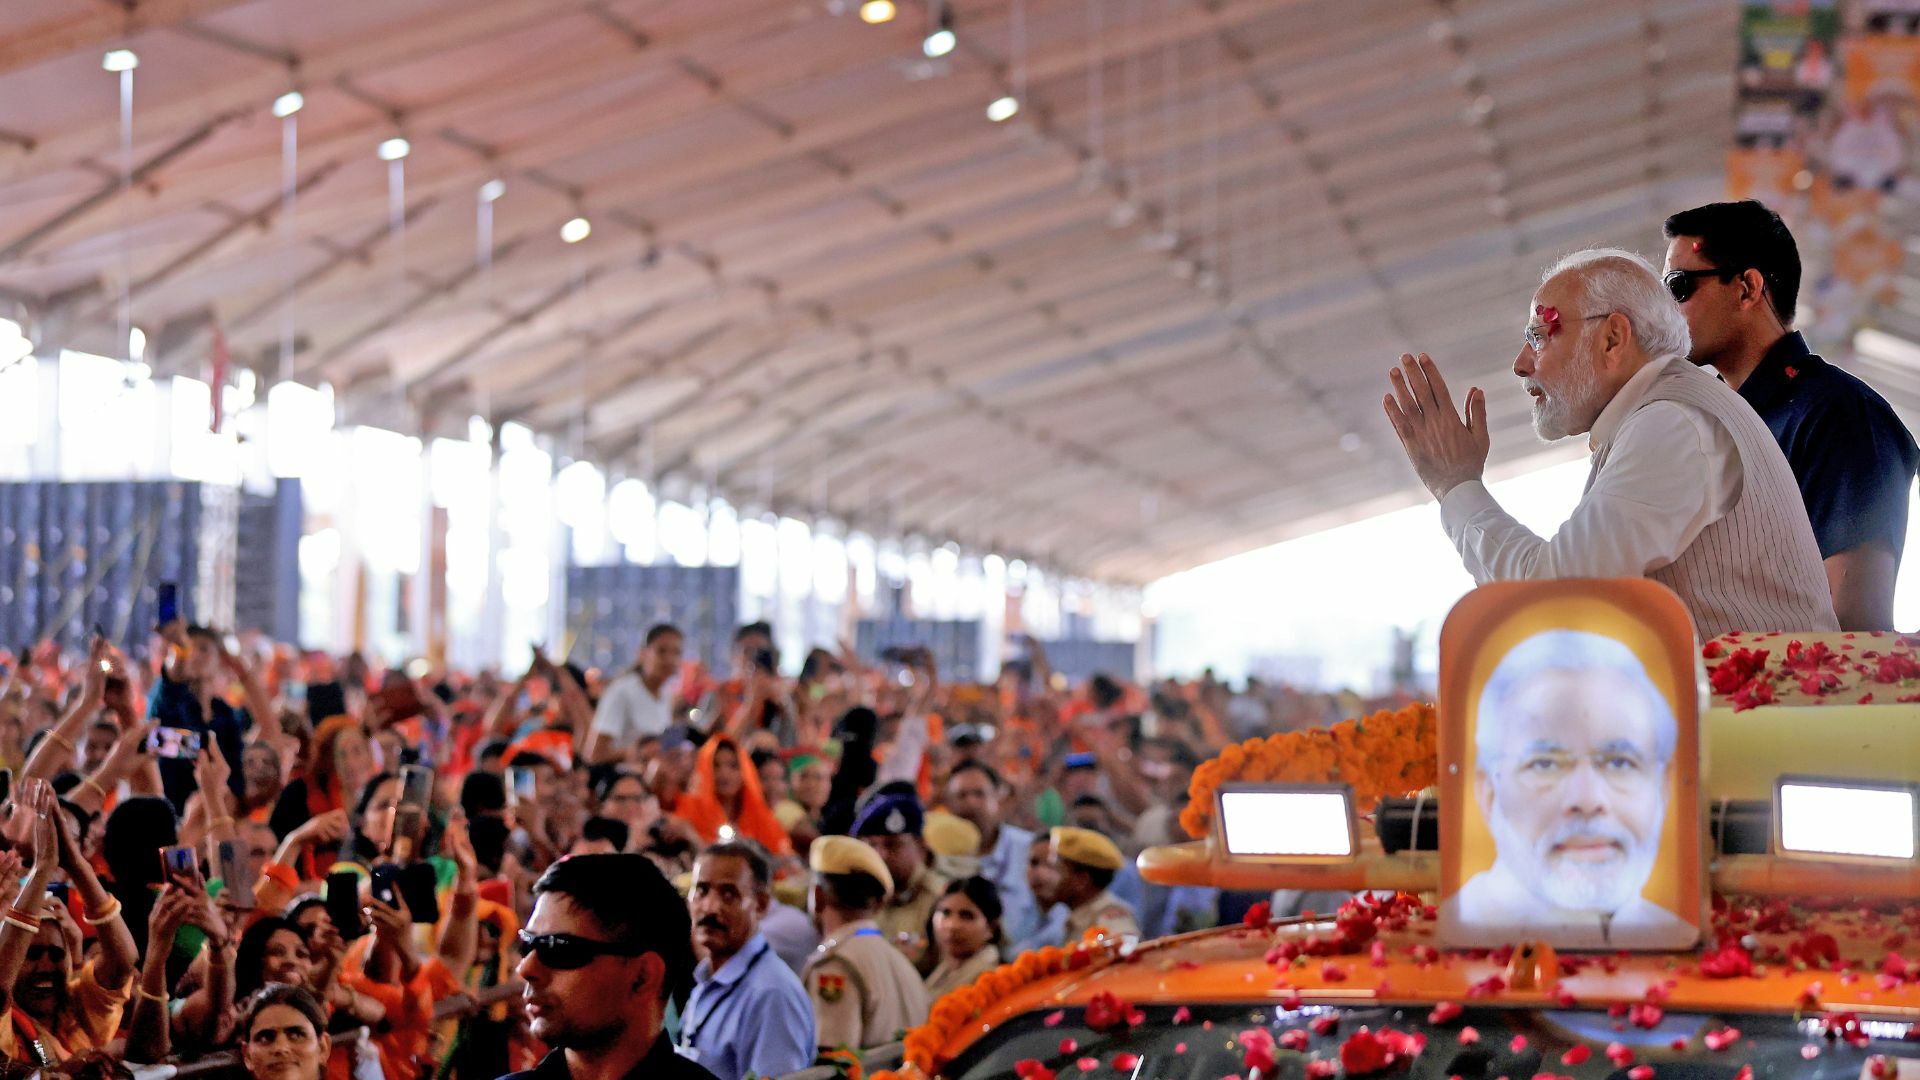 Prime Minister Narendra Modi exchanges greetings with a crowd in Jaipur.